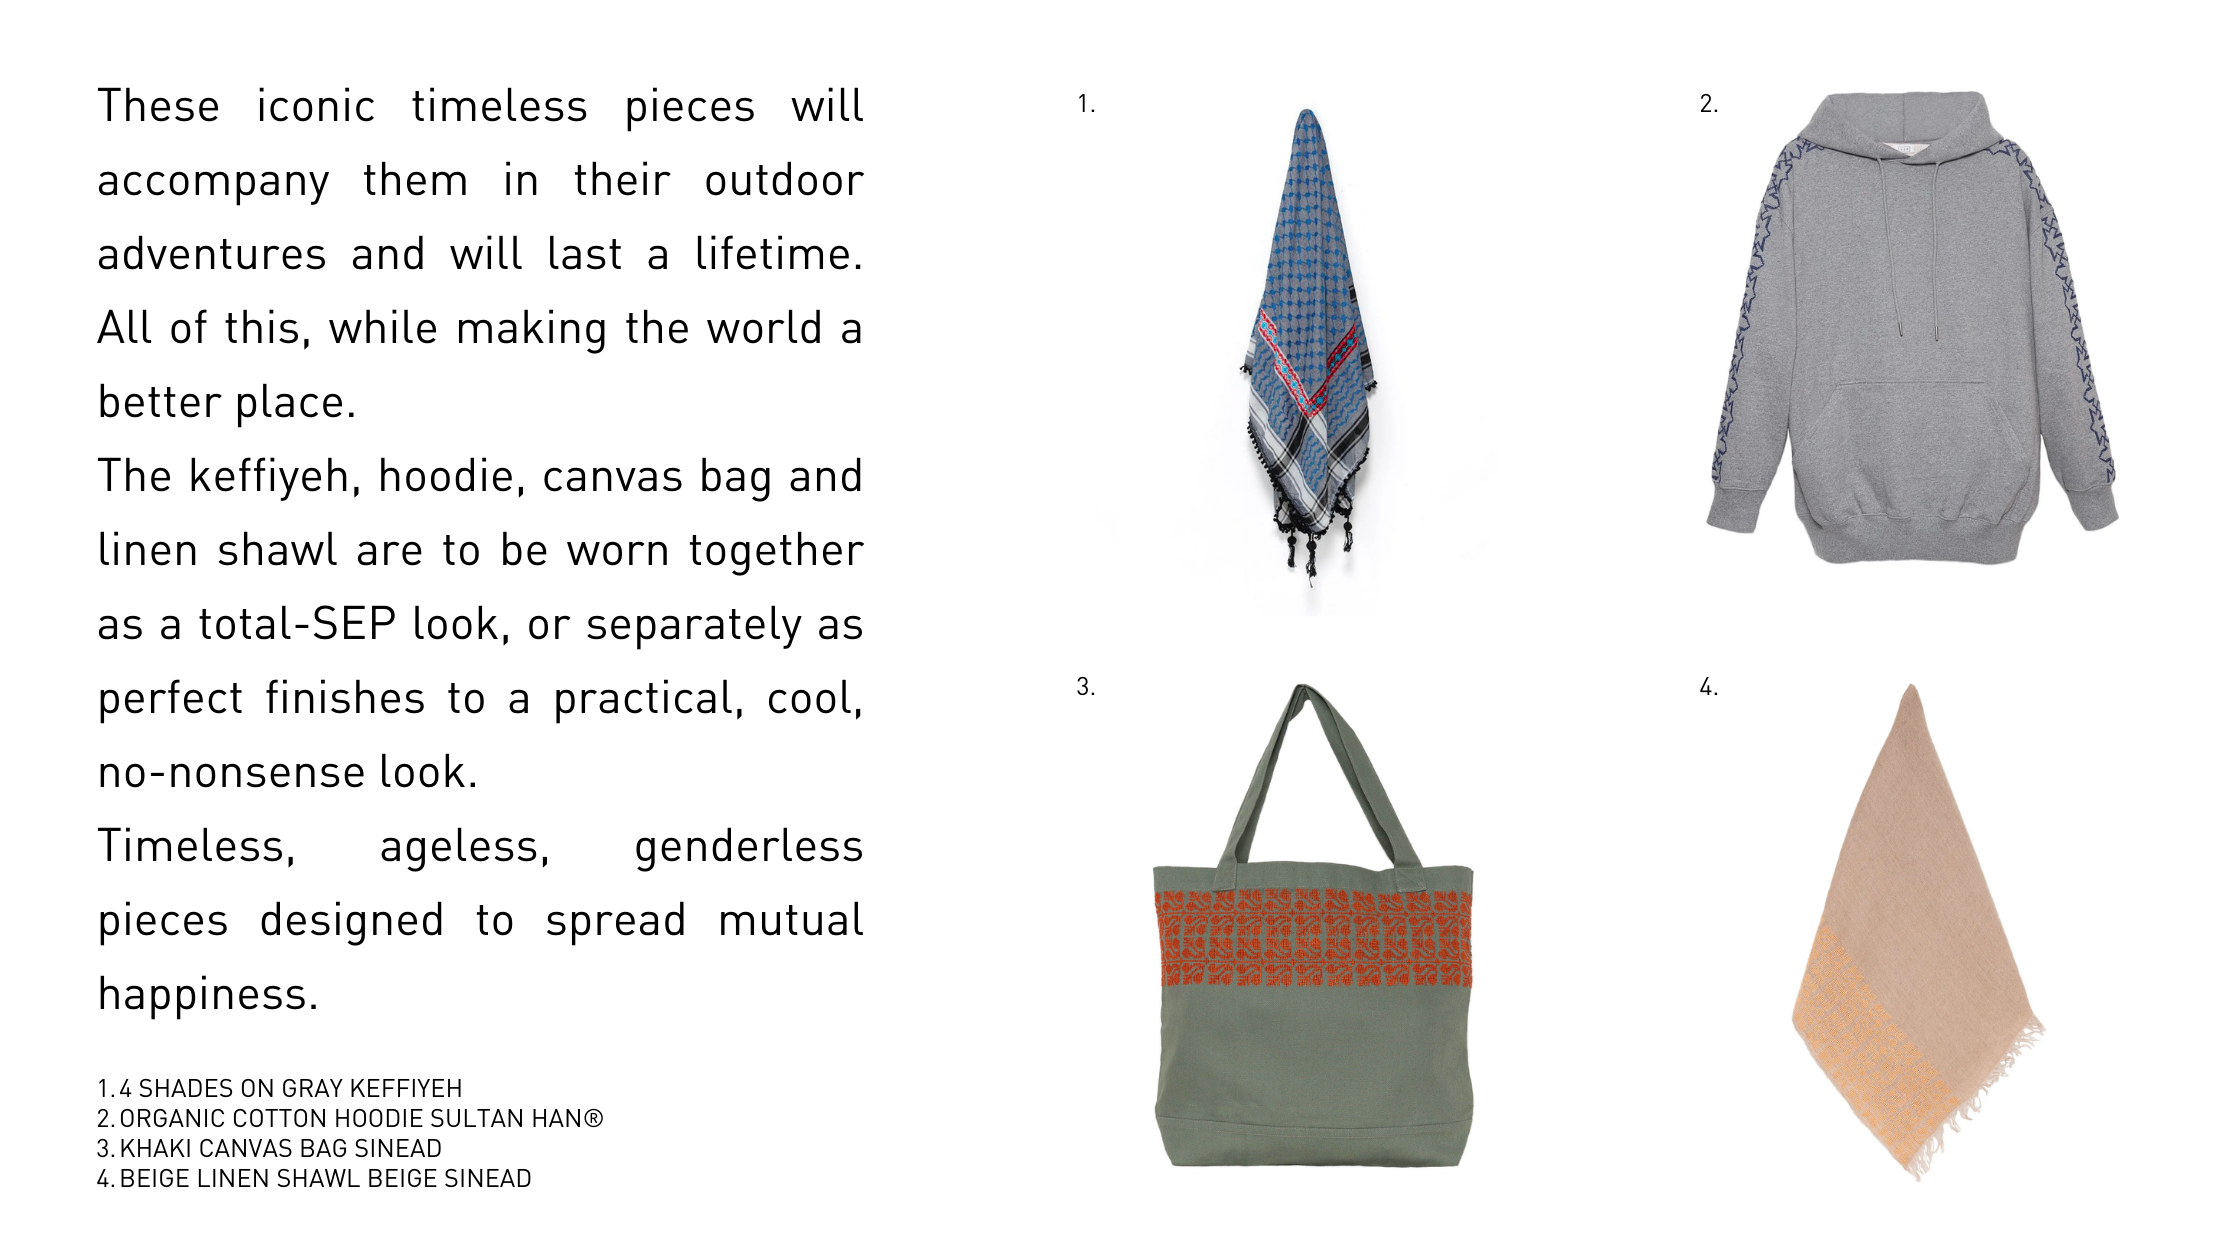 These iconic timeless pieces will accompany them in their outdoor adventures and will last a lifetime. All of this, while making the world a better place.  The keffiyeh, hoodie, canvas bag and linen shawl are to be worn together as a total-SEP look, or separately as perfect finishes to a practical, cool, no-nonsense look.  Timeless, ageless, genderless pieces designed to spread mutual happiness.